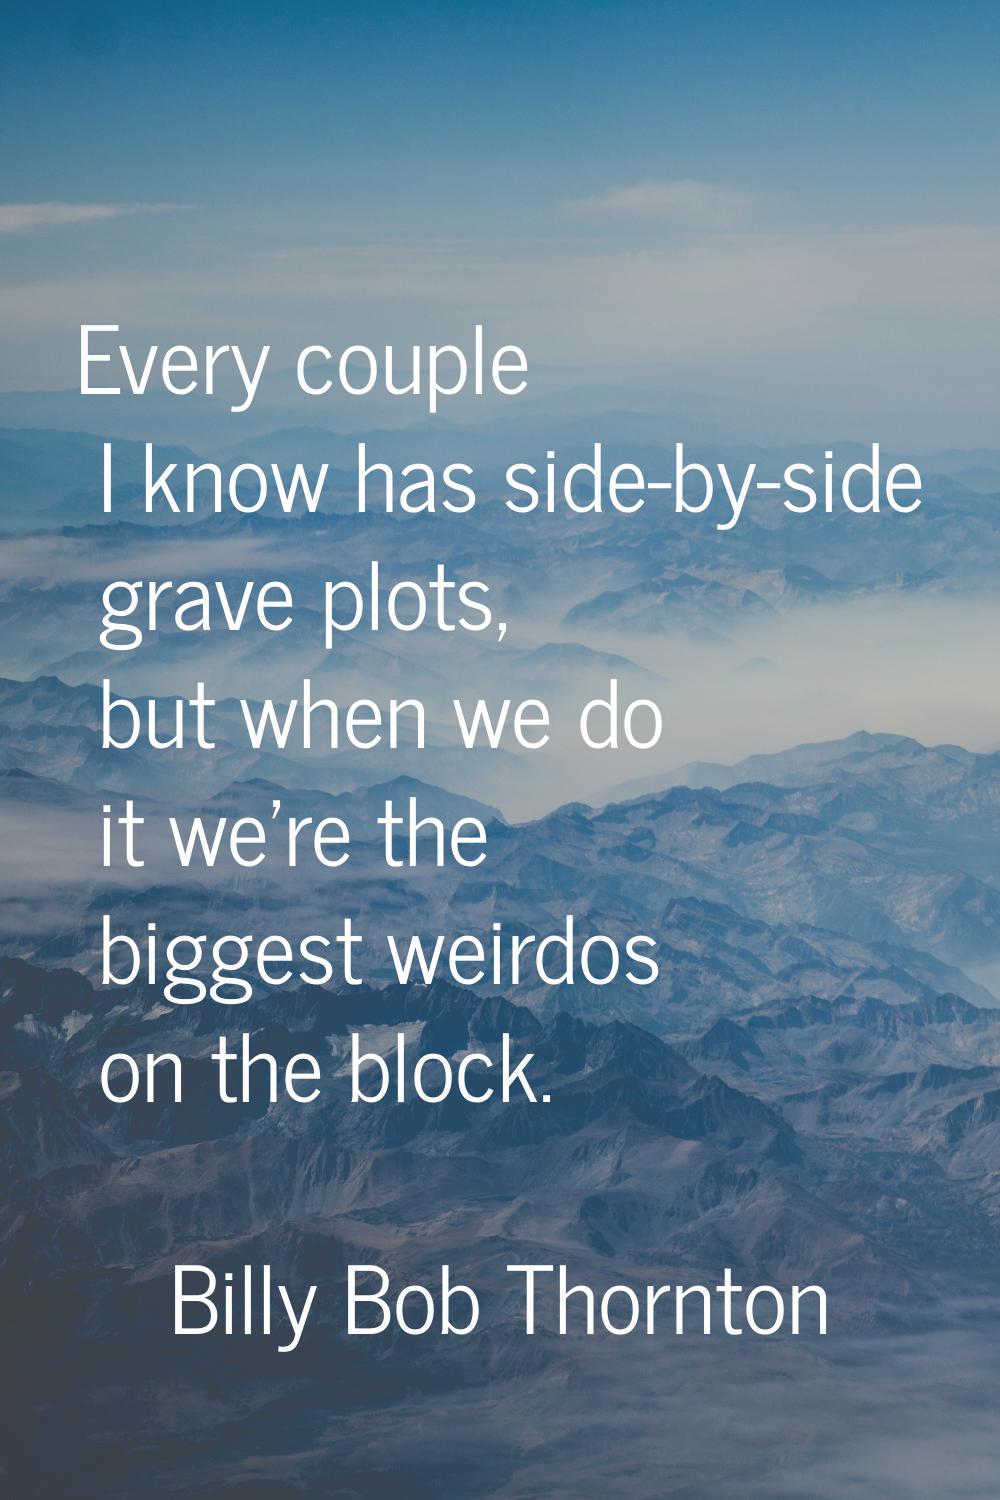 Every couple I know has side-by-side grave plots, but when we do it we're the biggest weirdos on th